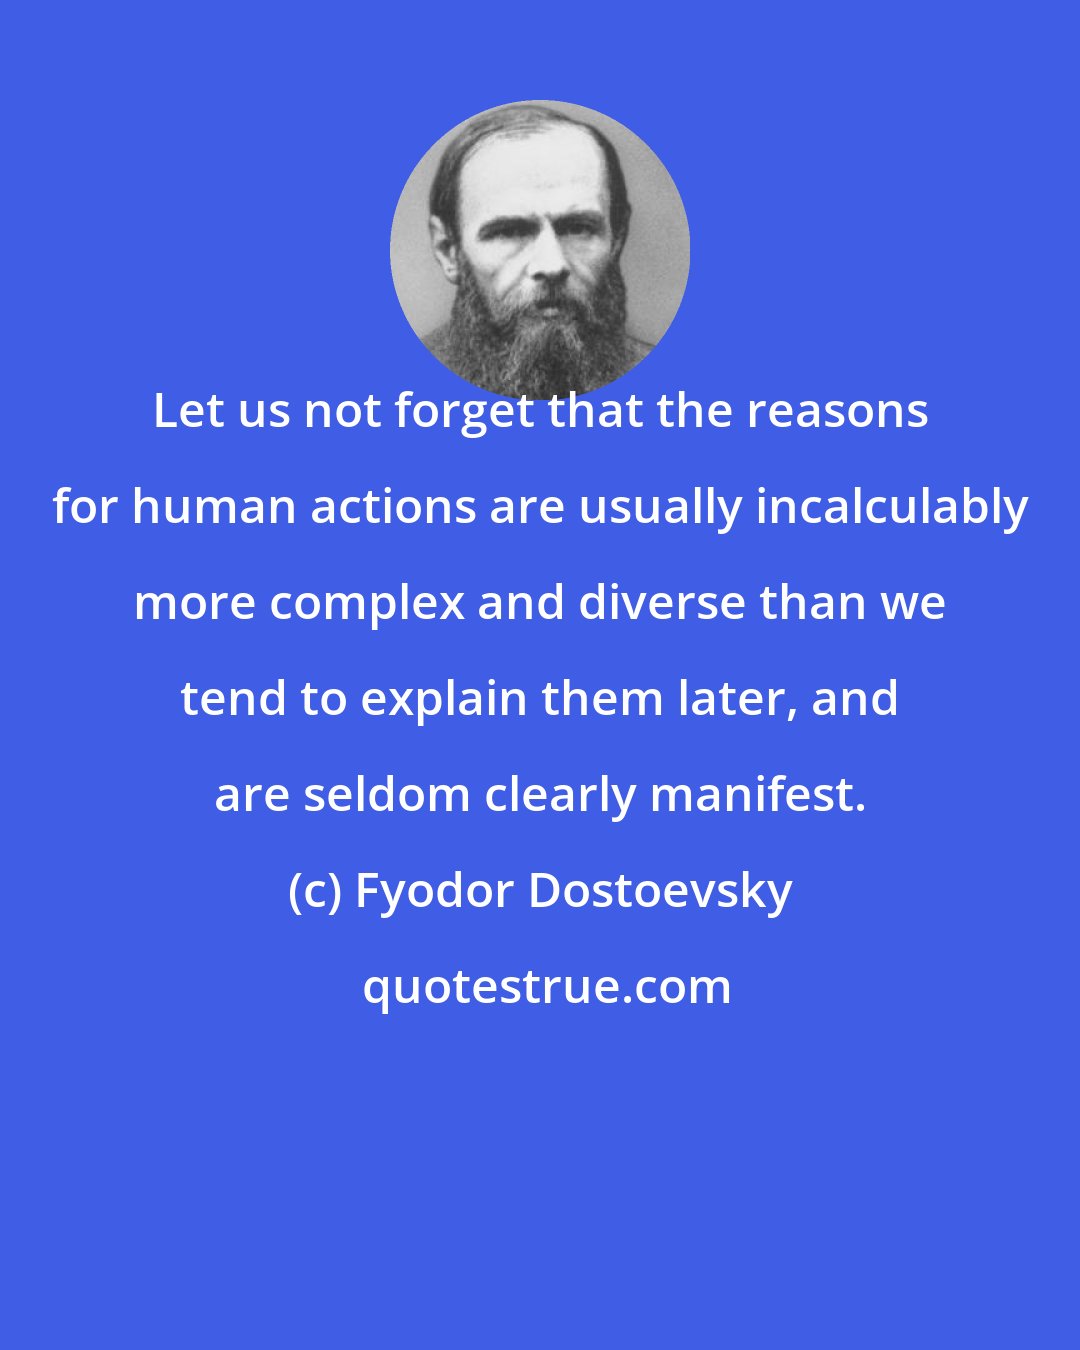 Fyodor Dostoevsky: Let us not forget that the reasons for human actions are usually incalculably more complex and diverse than we tend to explain them later, and are seldom clearly manifest.